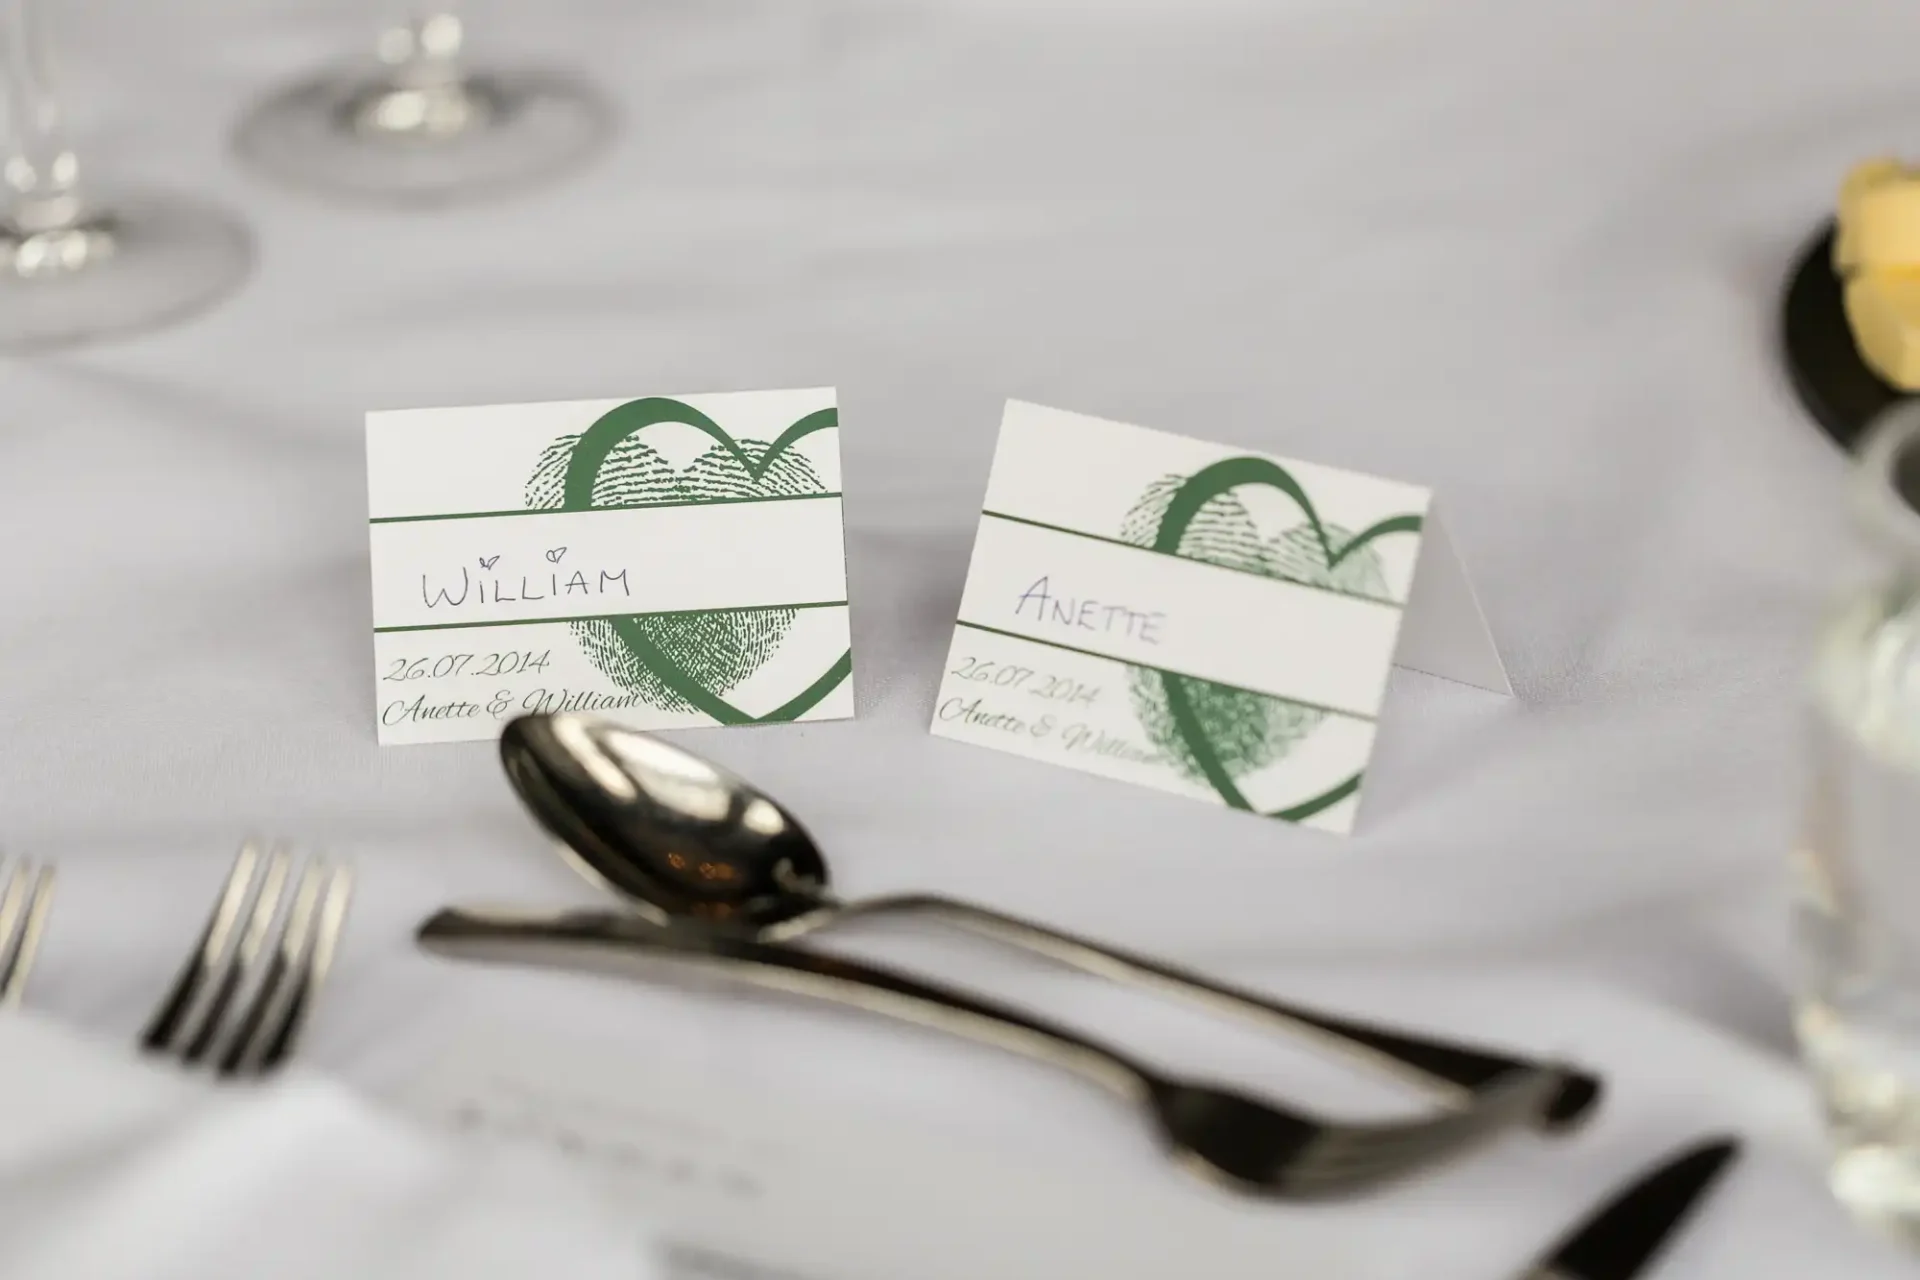 Two place cards with the names "william" and "anette" on a white tablecloth at a wedding, flanked by silverware.